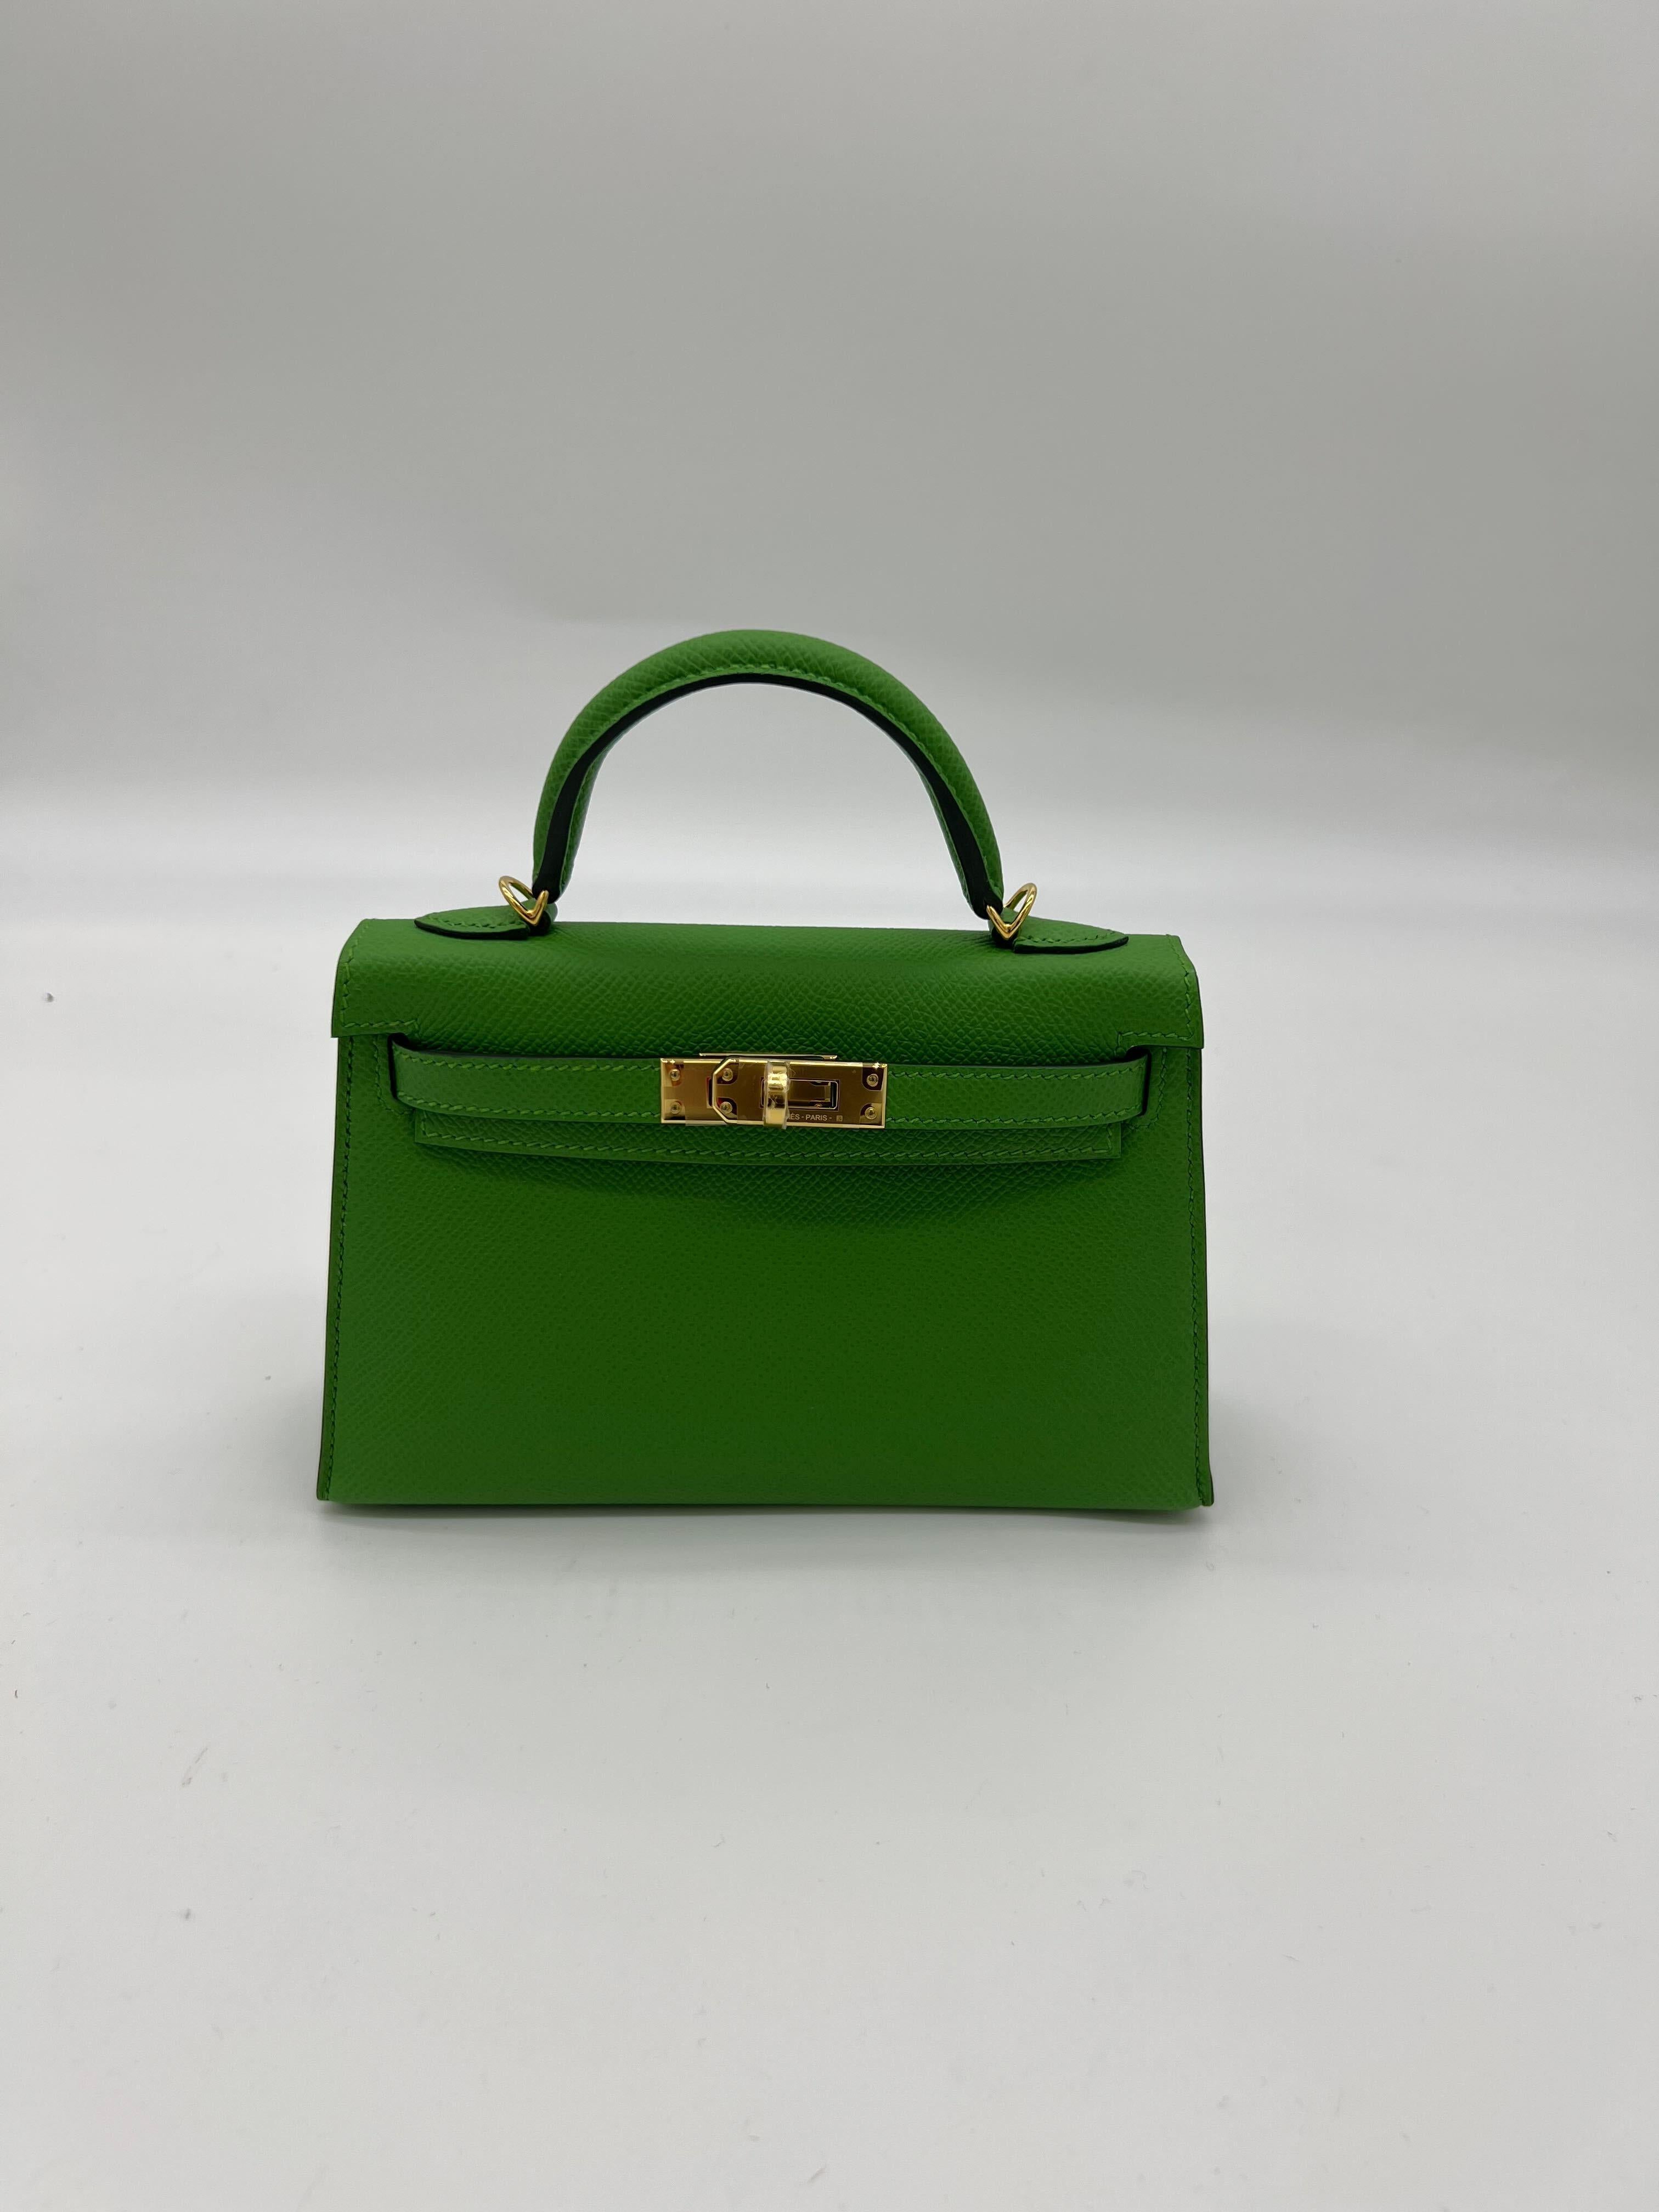 Hermes Kelly 20 Mini II Sellier Vert Yucca Veau Epsom Leather Gold Hardware

Condition & Year: New 2023
Material: Epsom Leather
Measurements: 20cm x 16cm x 10cm
Hardware: Gold

*Comes with full original packaging.
*Full plastic on hardware.